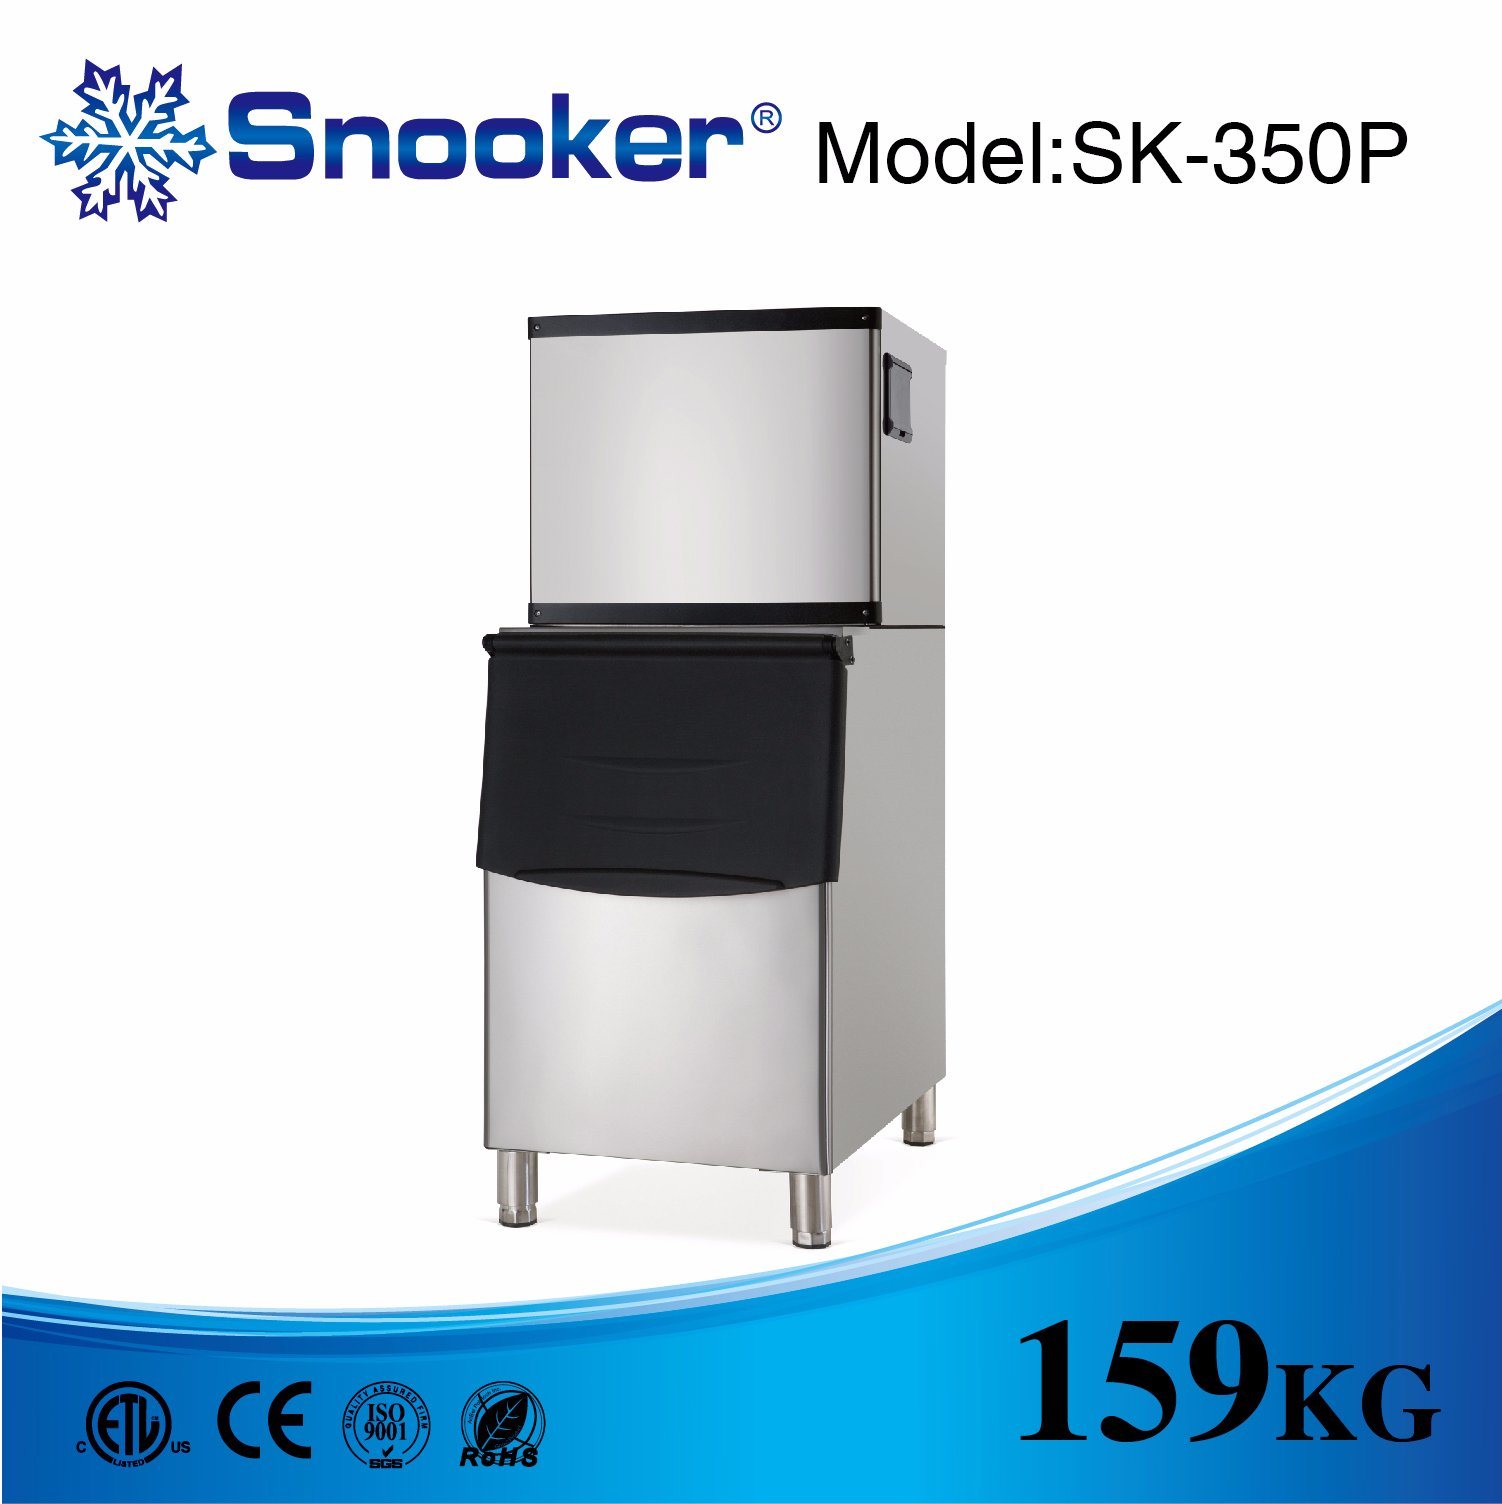 Snooker Sk-350p Hot Sell Commercial Use Ice Machine, Ice Maker, Ice Cube Machine, Ice Making Machine